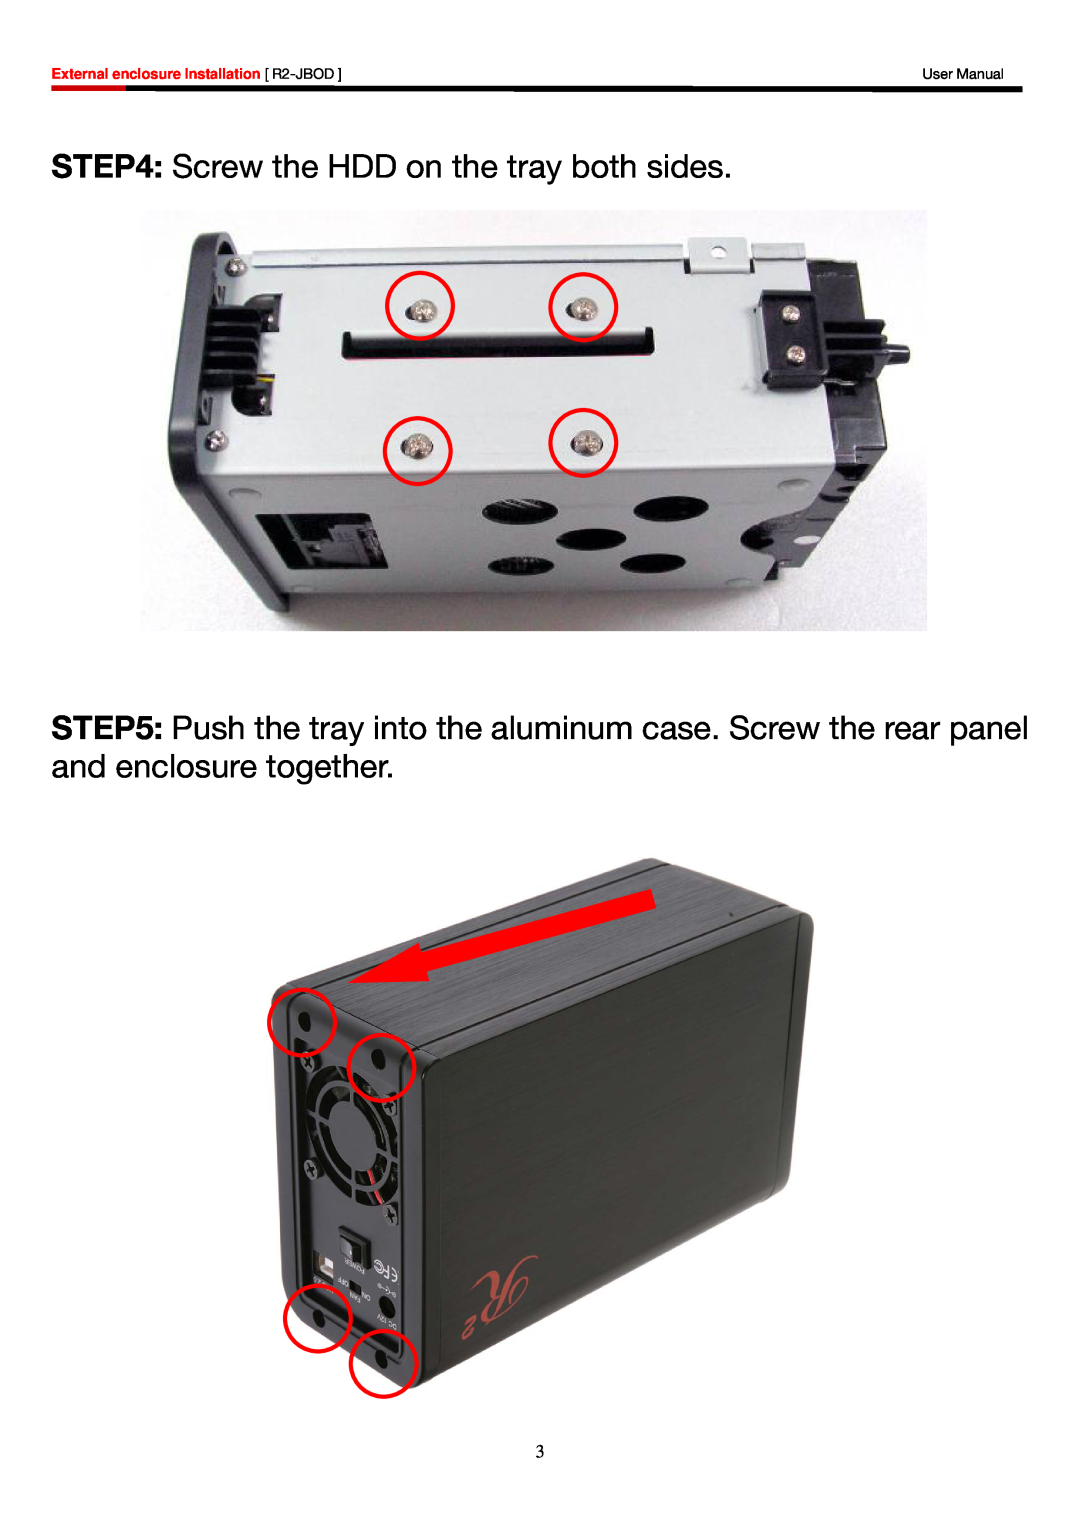 Rosewill user manual Screw the HDD on the tray both sides, External enclosure Installation R2-JBOD, User Manual 